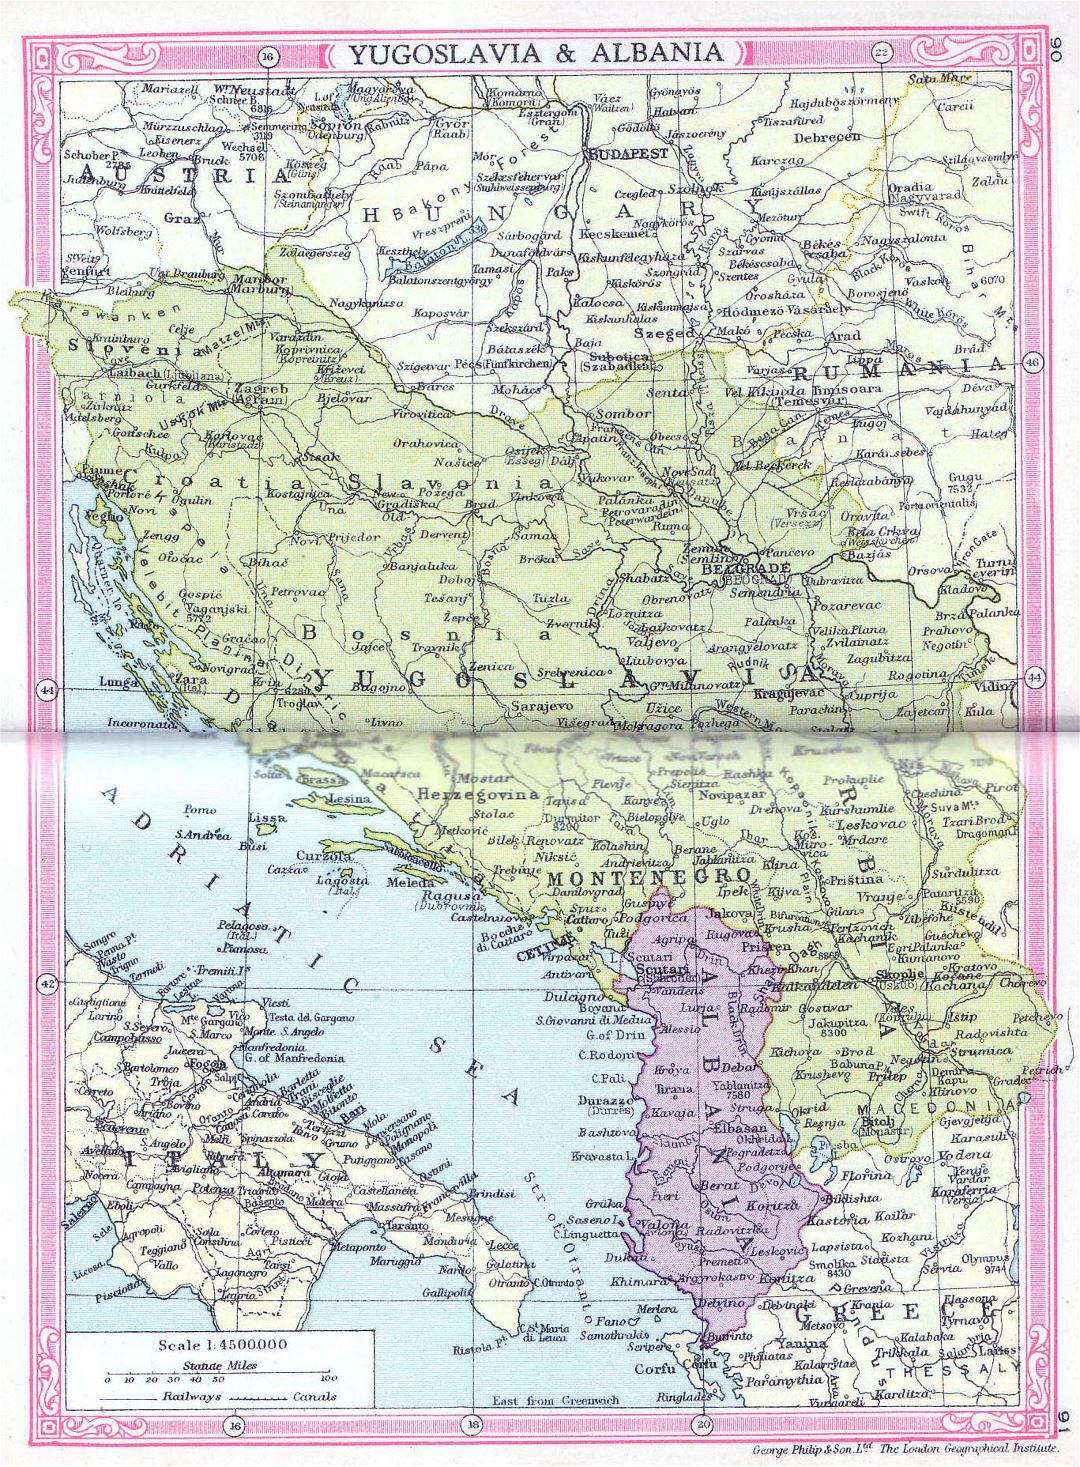 Large old map of Yugoslavia and Albania - 1935